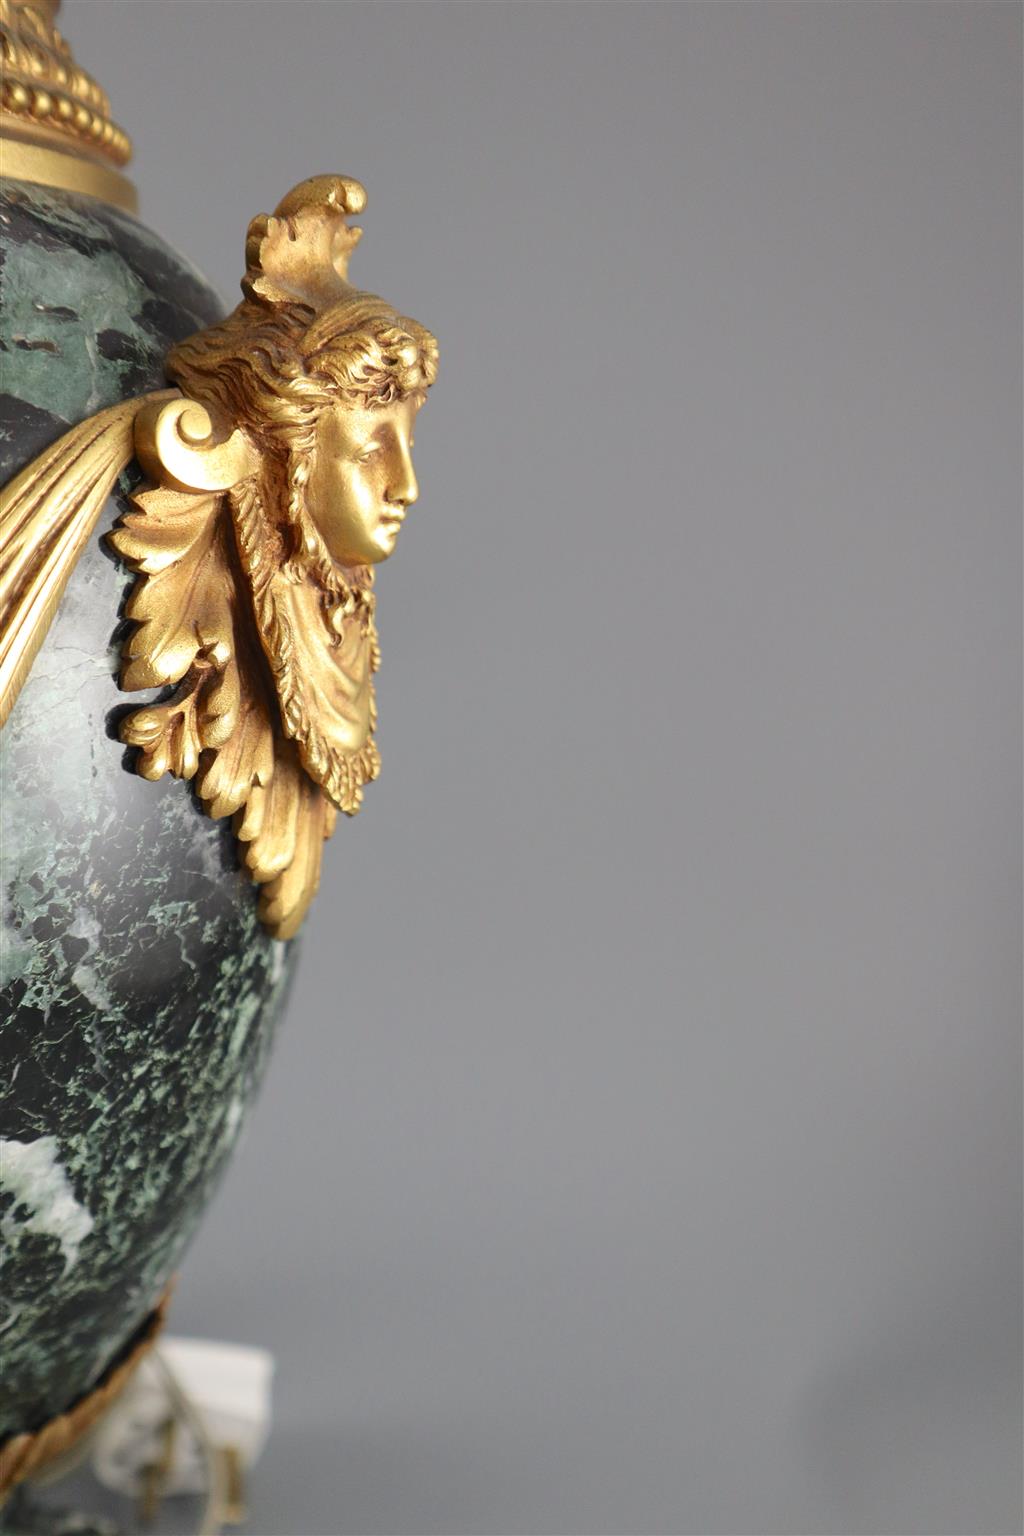 A pair of early 20th century ormolu green marble table lamps, overall height 20in.